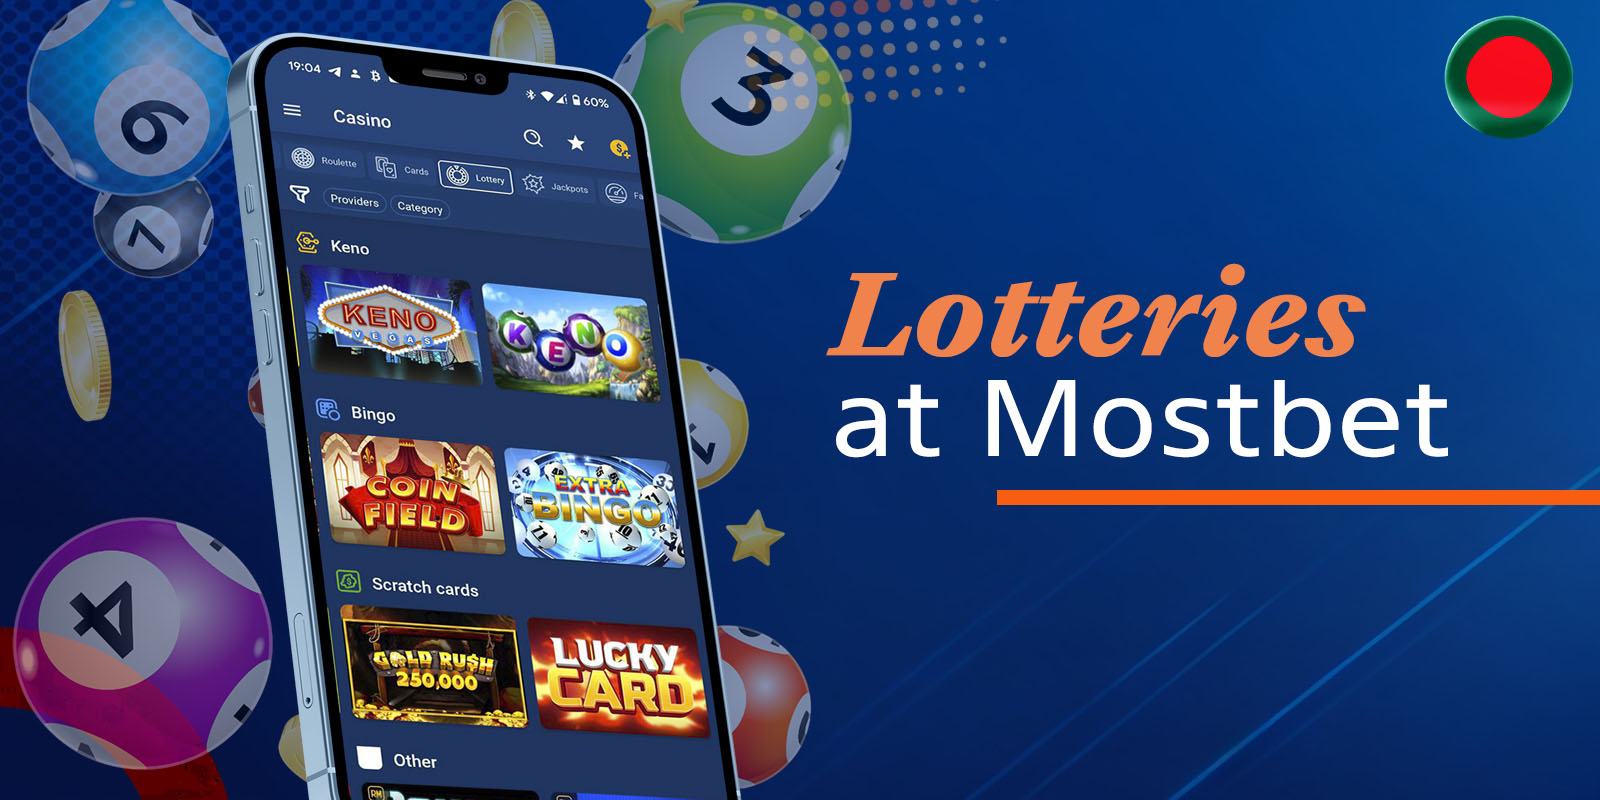 A wide variety of lotteries